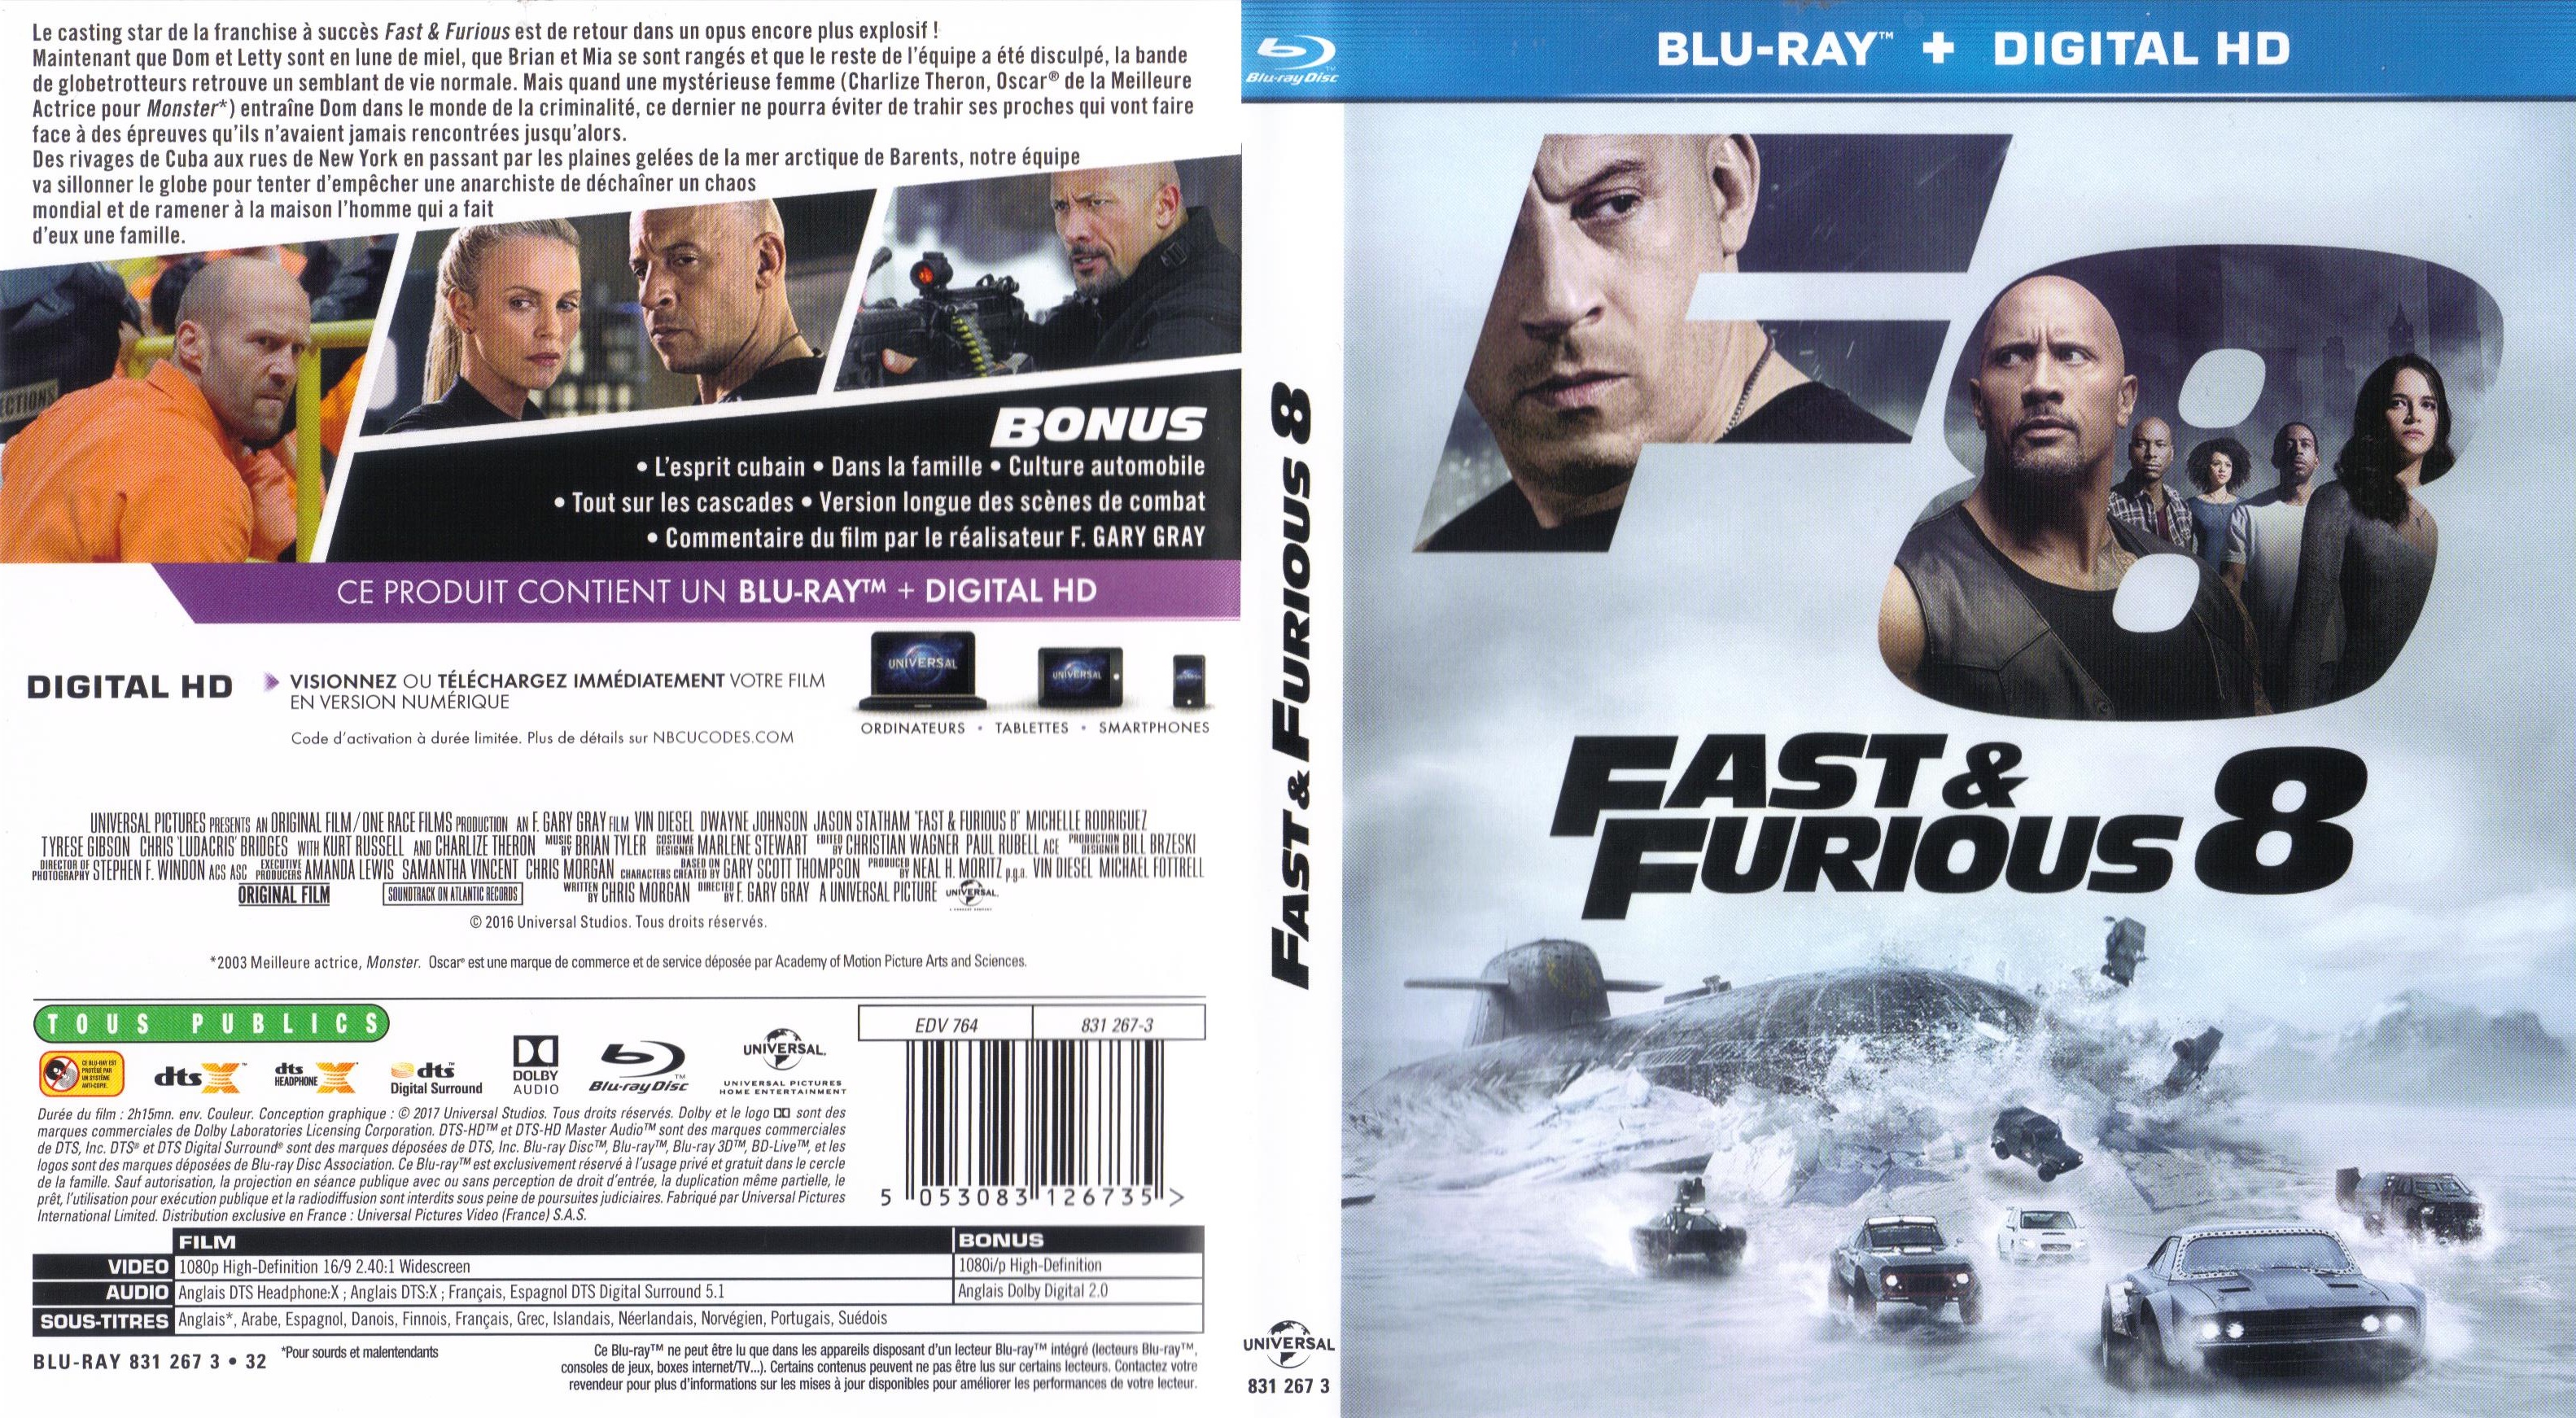 Jaquette DVD Fast And Furious 8 (BLU-RAY) v3